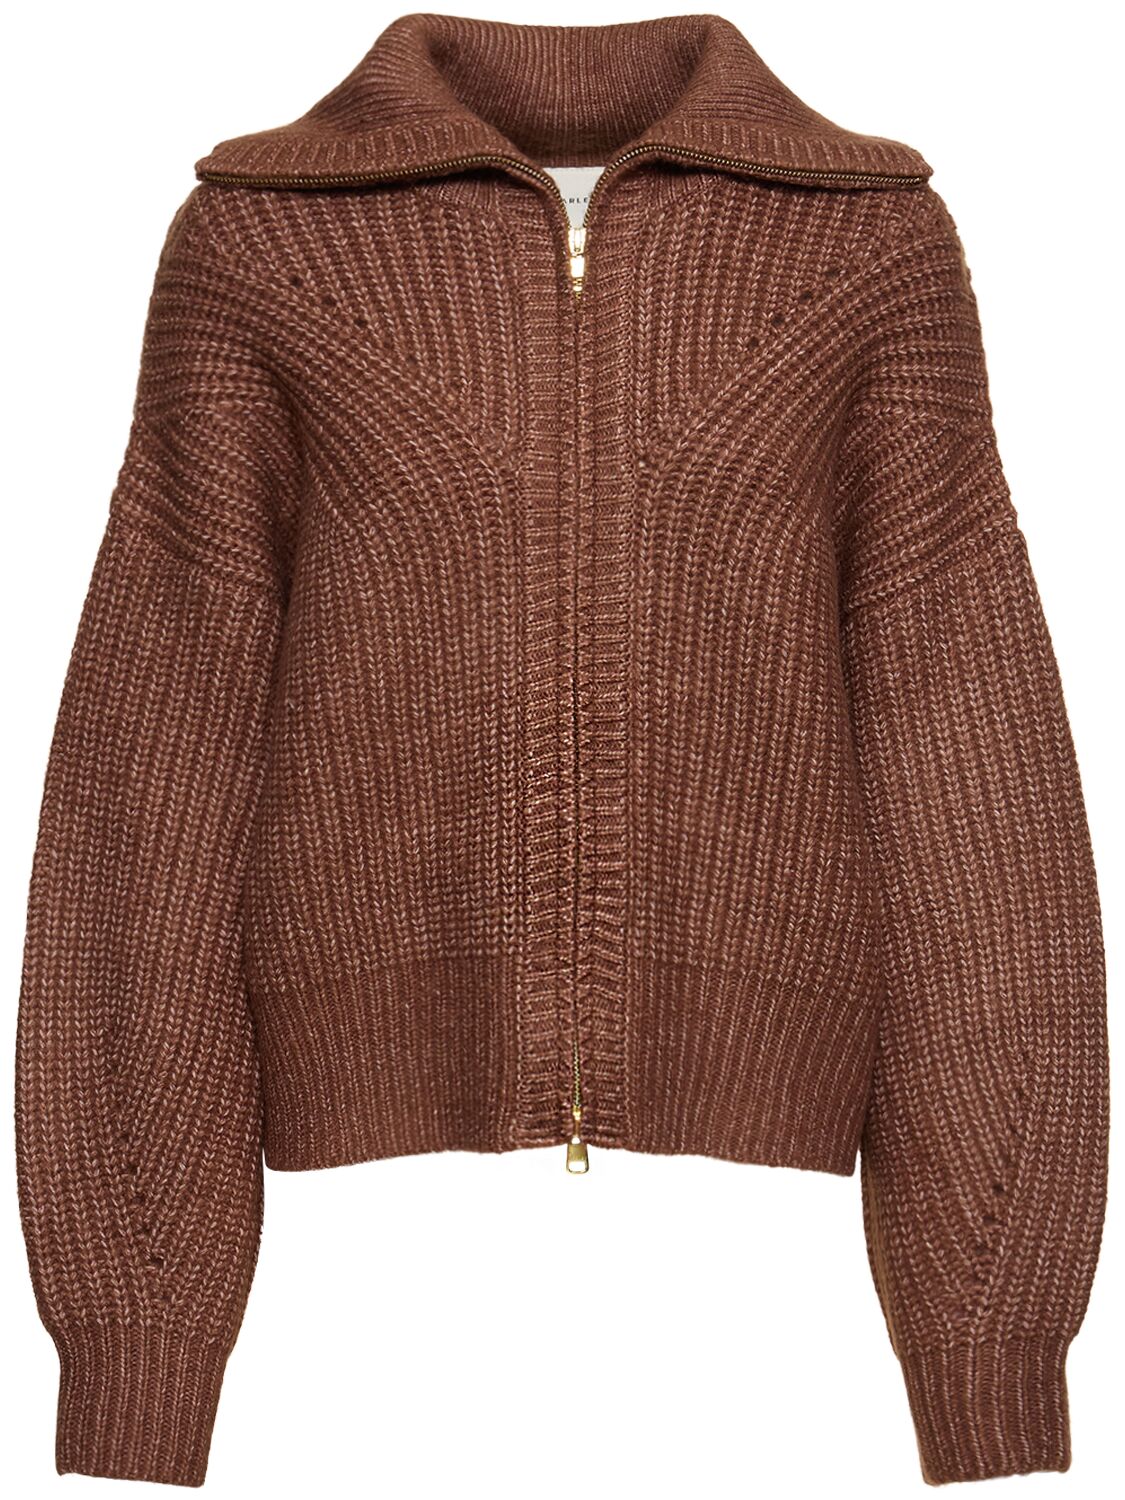 Image of Putney Knit Zip-up Sweater